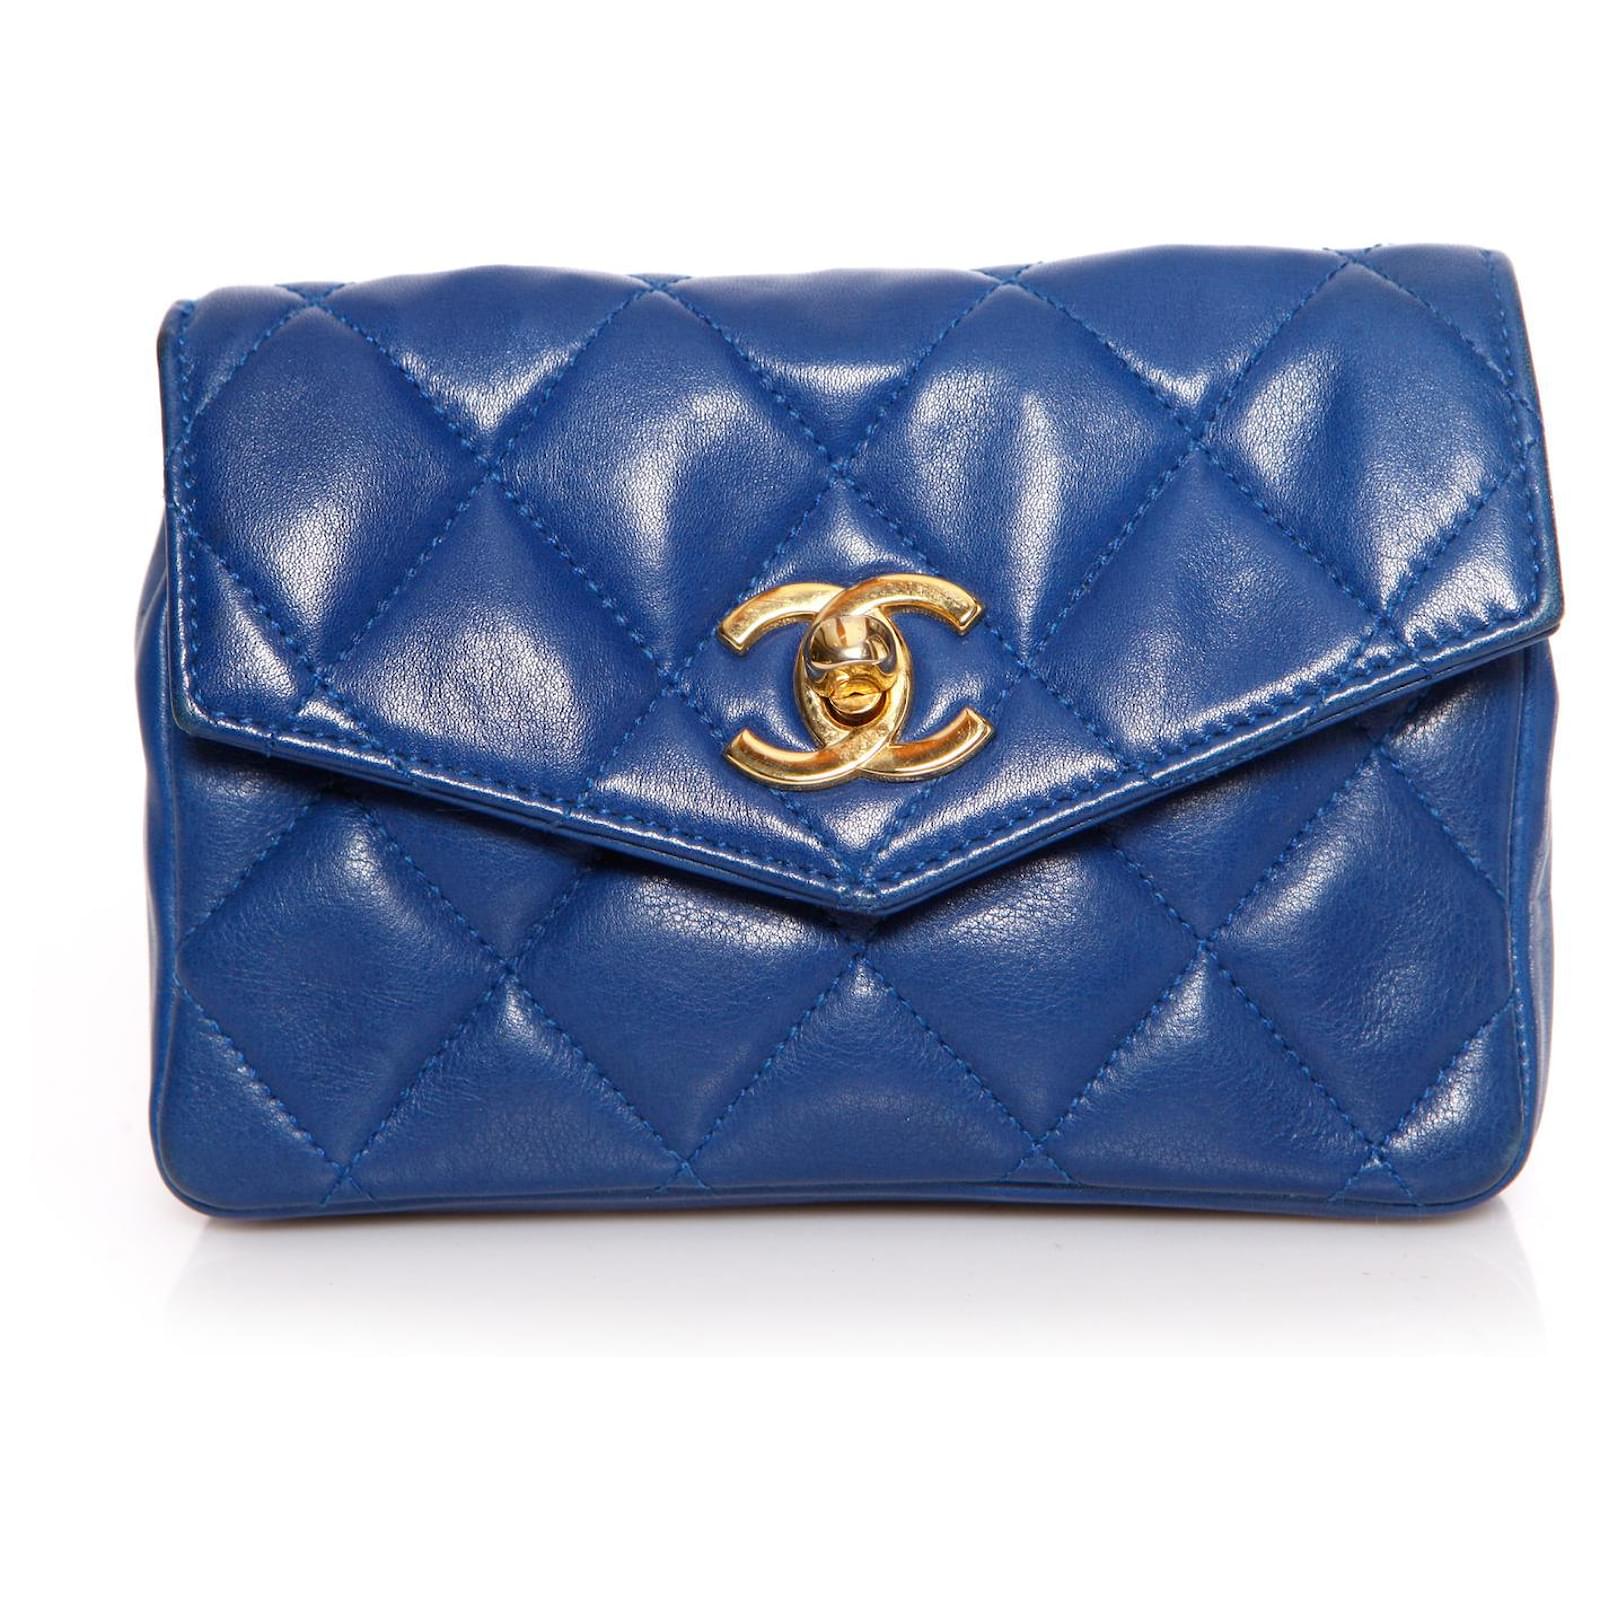 Chanel, Leather belt bag in red/Blue/green with gold hardware